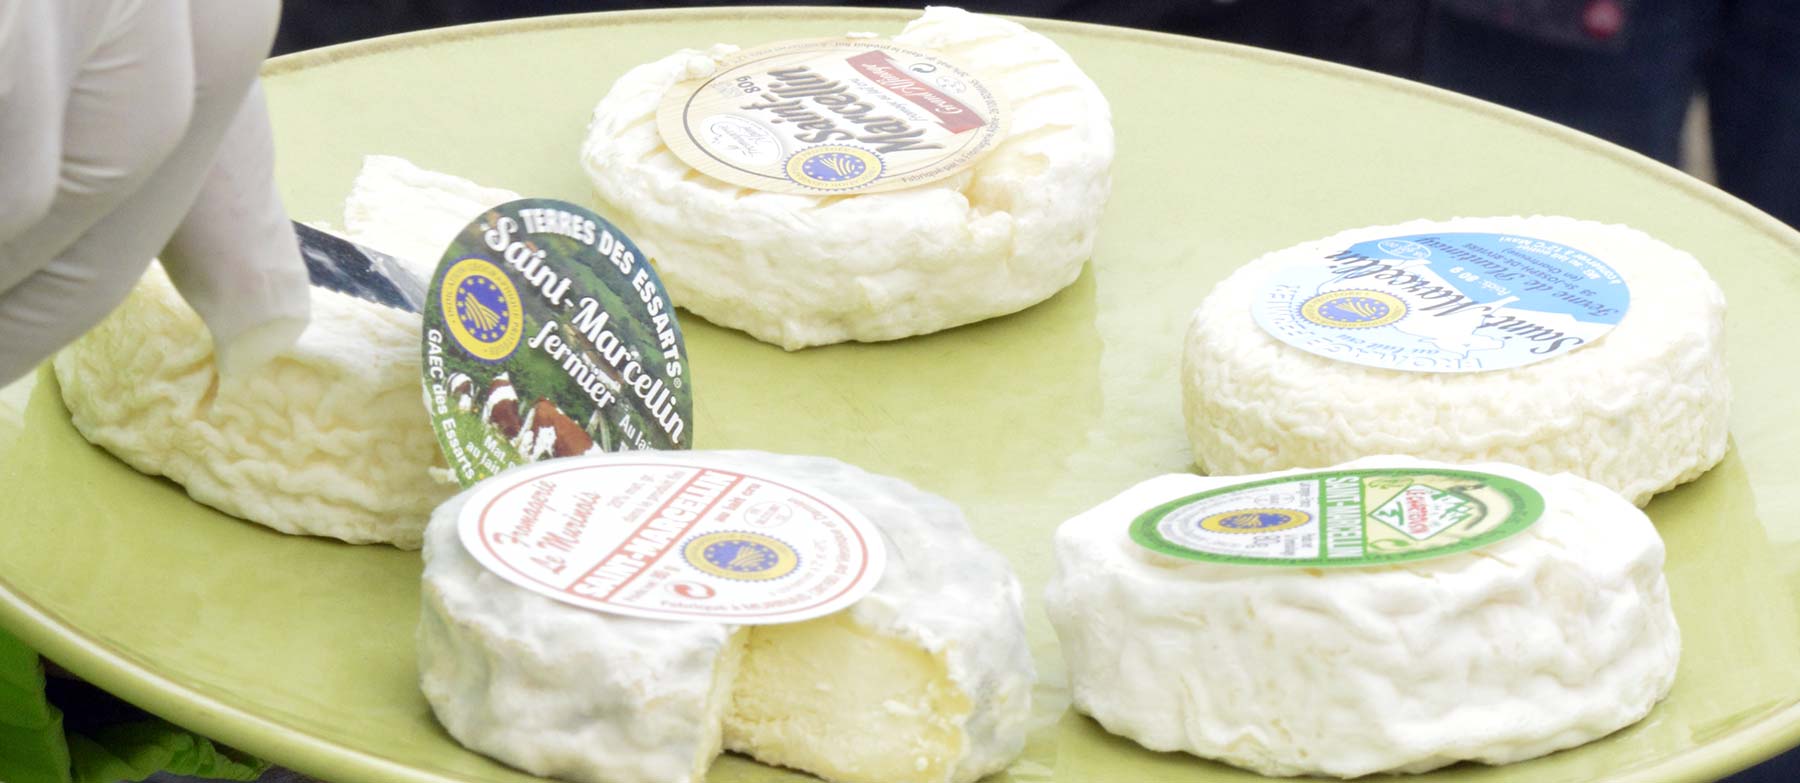 Fromage Saint-Marcellin